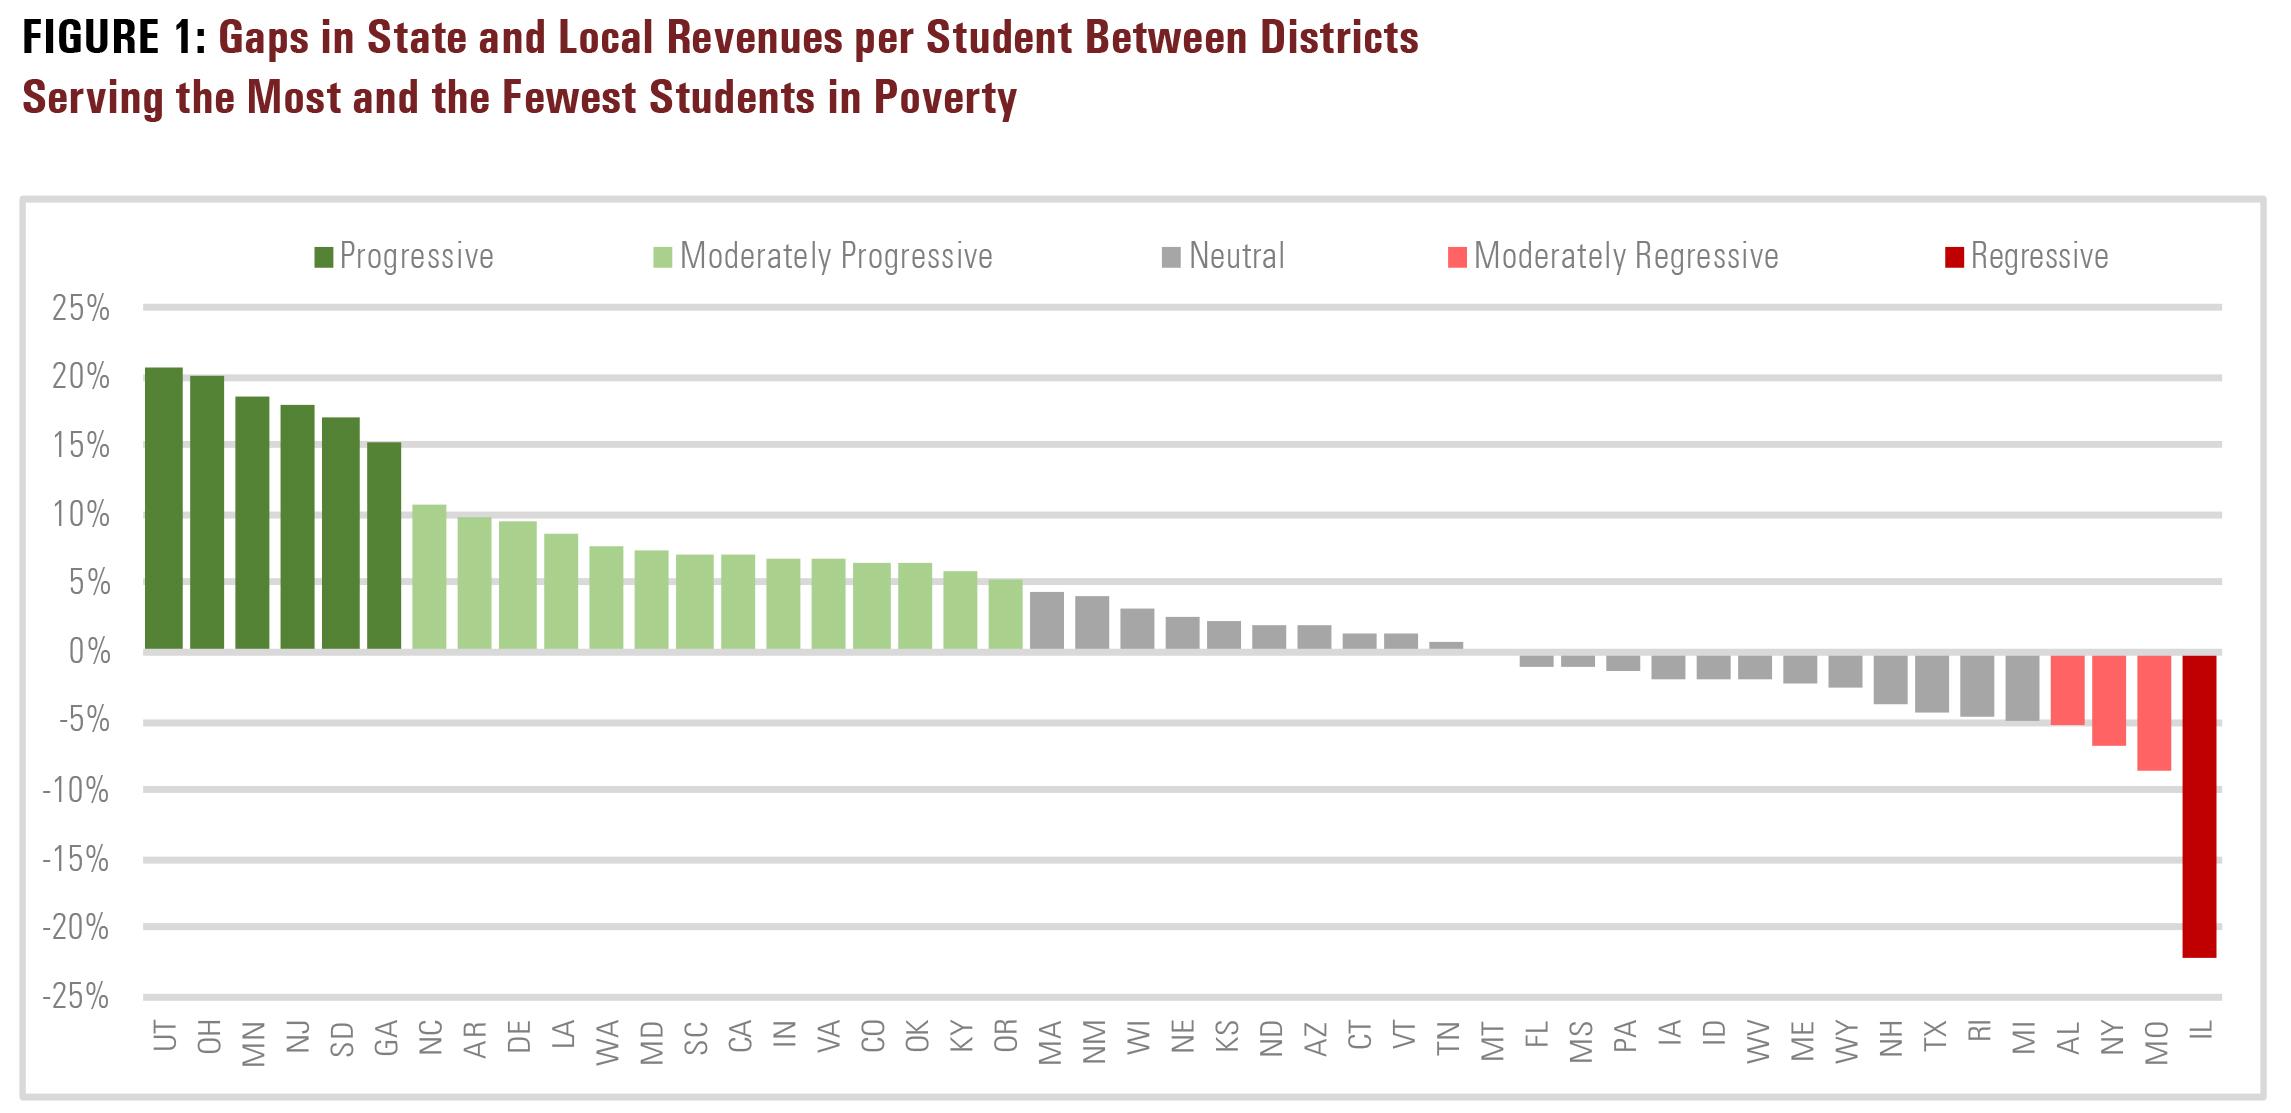 This chart displays the gaps in state and local revenues per student between districts serving the most and the fewest students in poverty. Illinois is represented on the far right side. (The Education Trust)